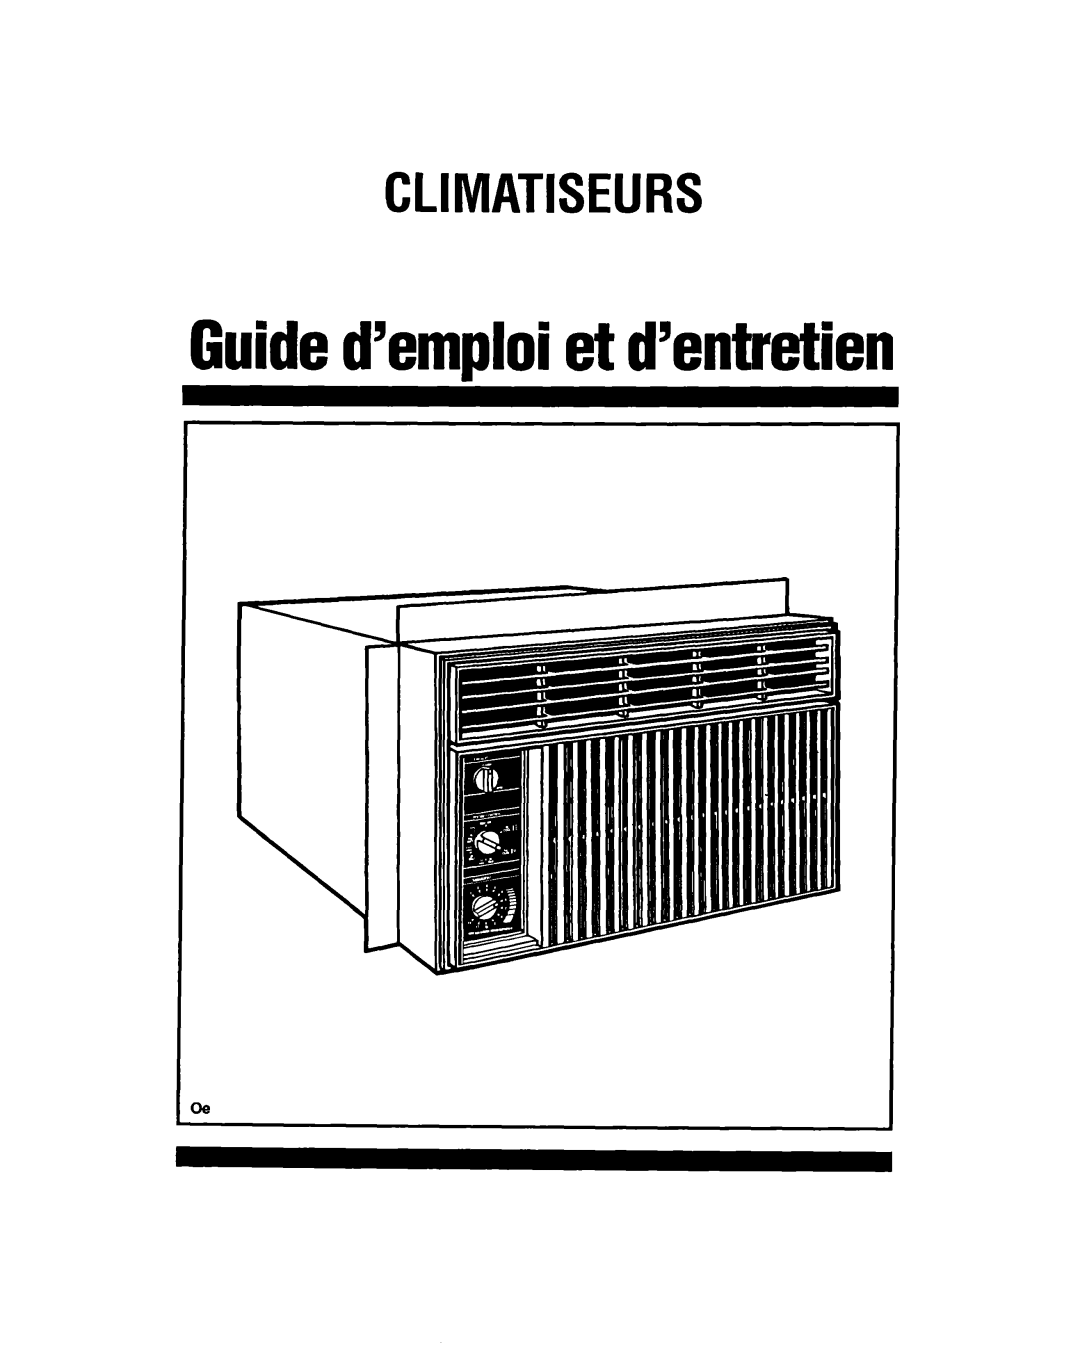 Whirlpool CAH12W04 manual Climatiseurs, Guided’emploiet d’entretien 